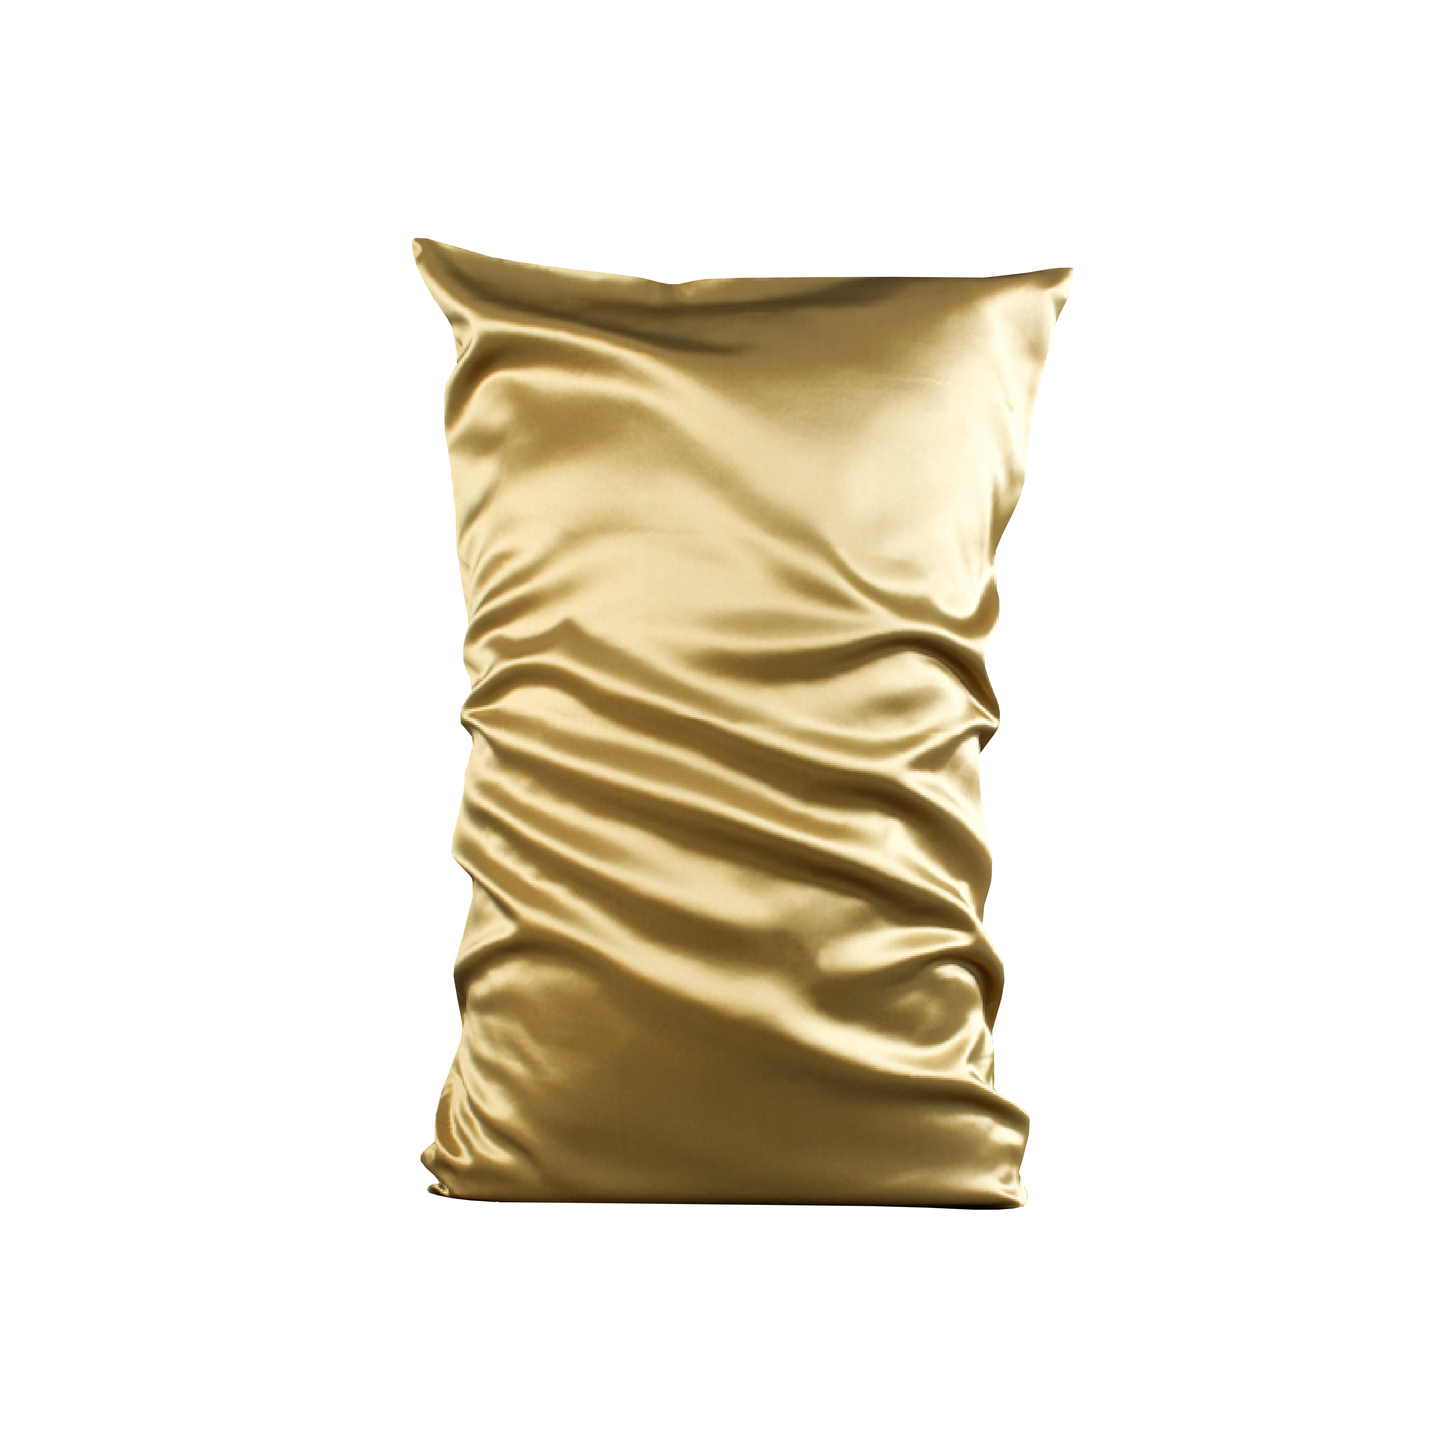 "I'm very happy with this silk pillow cover," said one reviewer. "I needed to get one because I have long hair and sleep with it in a loose bun on top of my head. I was noticing quite a bit of hair breakage on the back of my head at the nape of my neck. Since I started using a silk pillowcase, the breakage has pretty much stopped. It's very comfortable and stays cool throughout the night." Customer Reviews